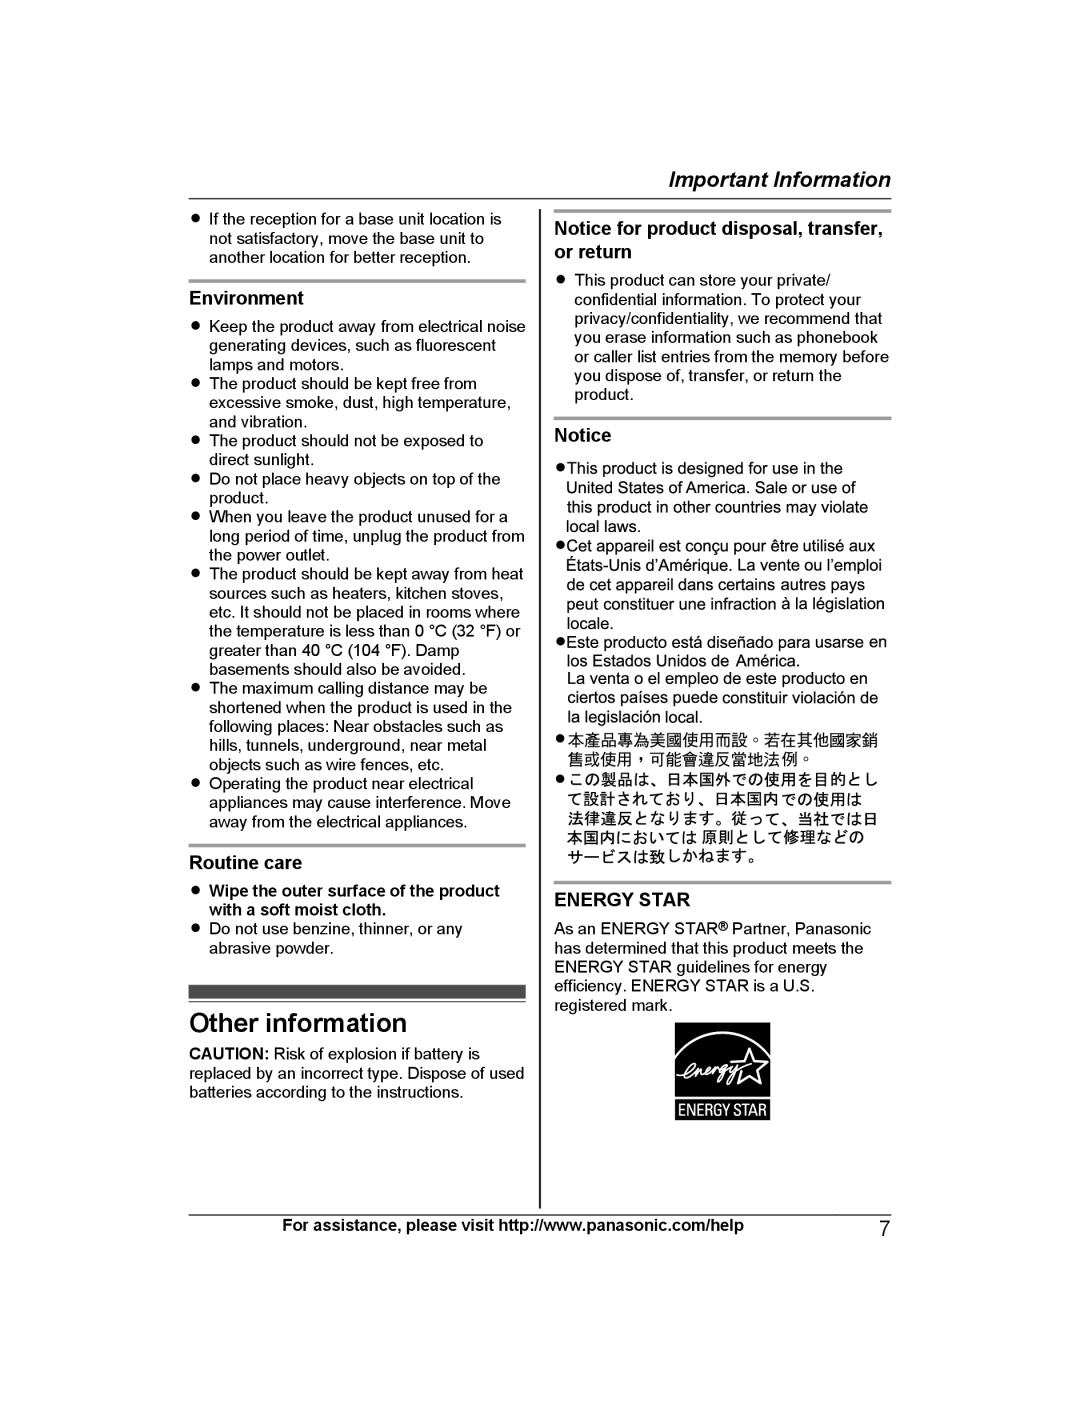 Panasonic KX-TG313SK Other information, Environment, Routine care, Notice for product disposal, transfer, or return 